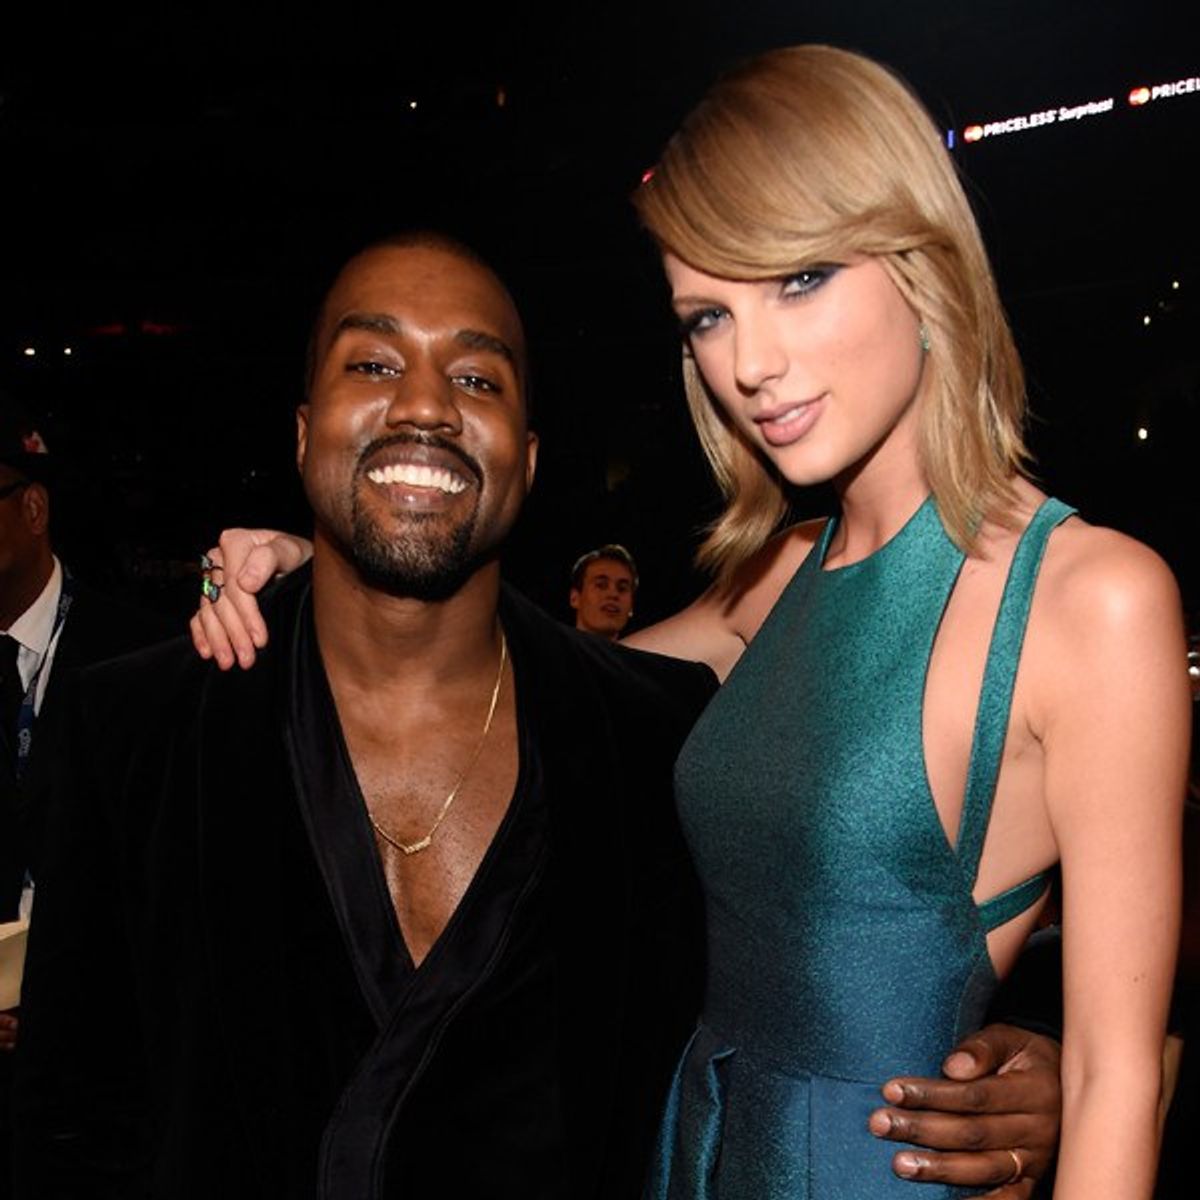 A Run Down Of The Taylor Swift And Kimye Celebrity Feud And Why We Shouldn't Be Picking Sides